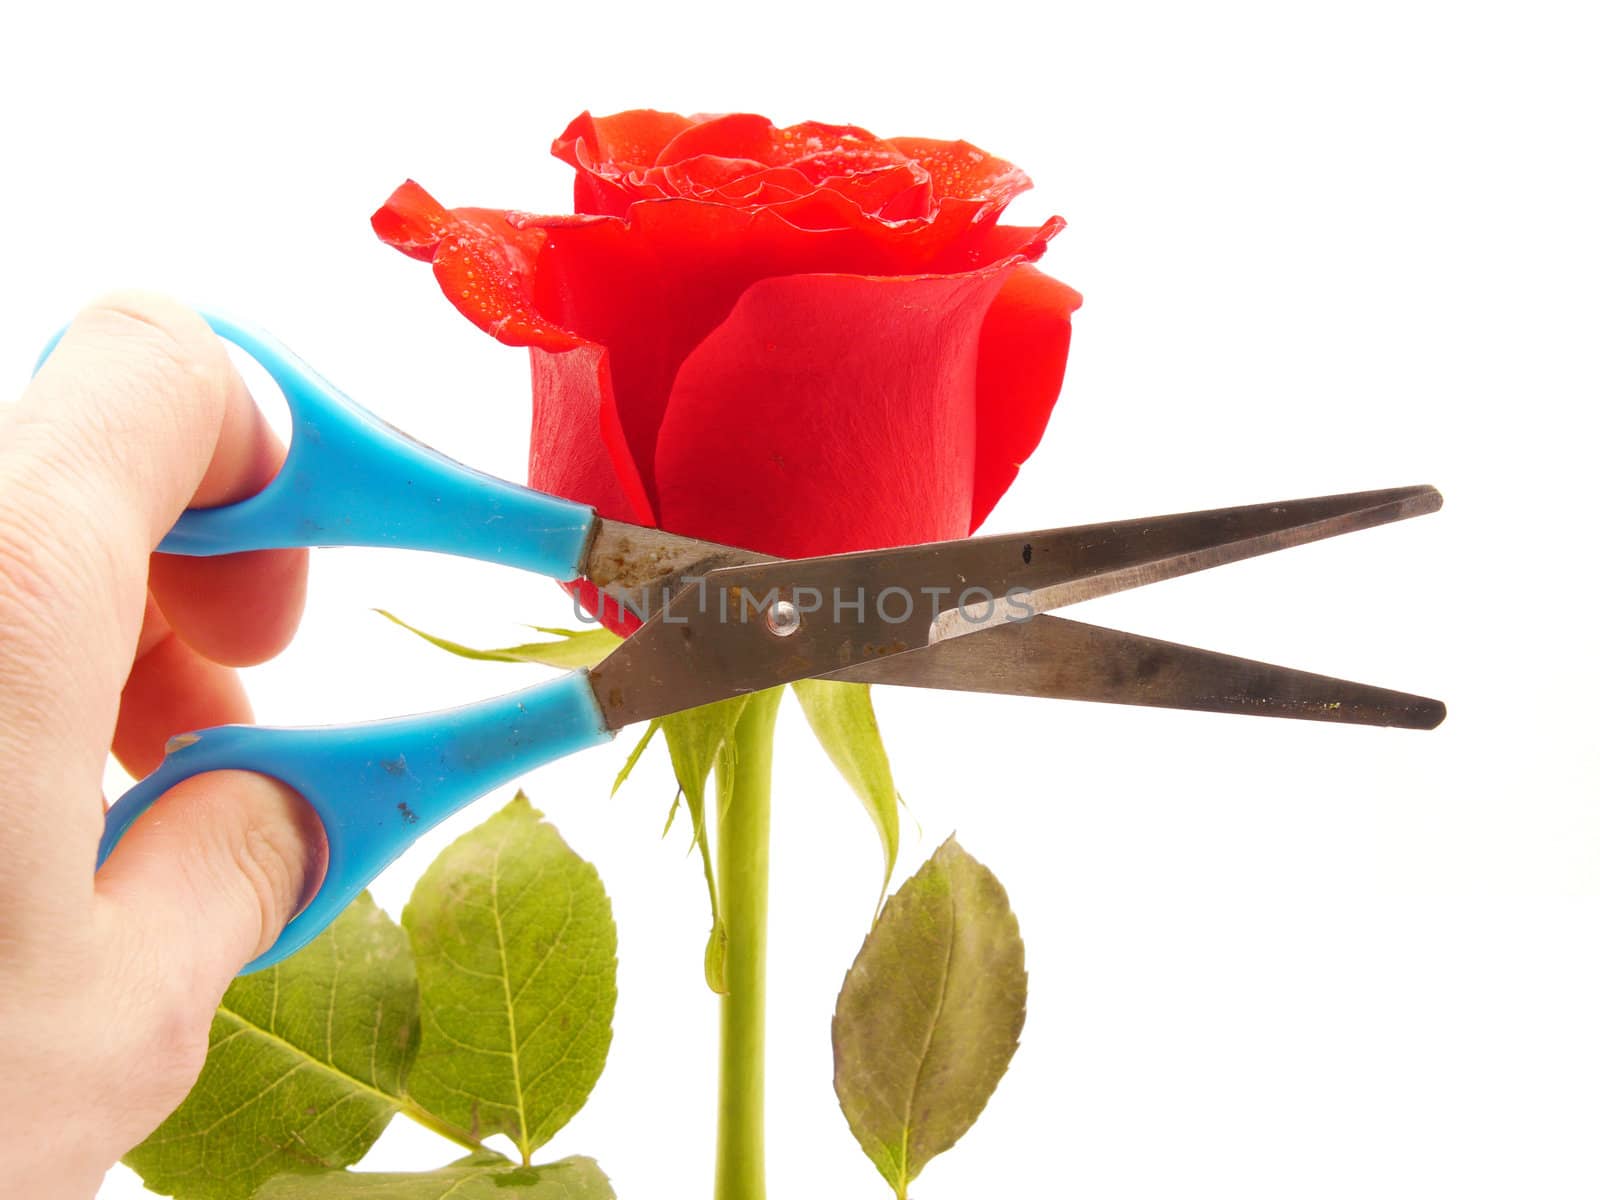 Rose and scissors on a white background by Enskanto